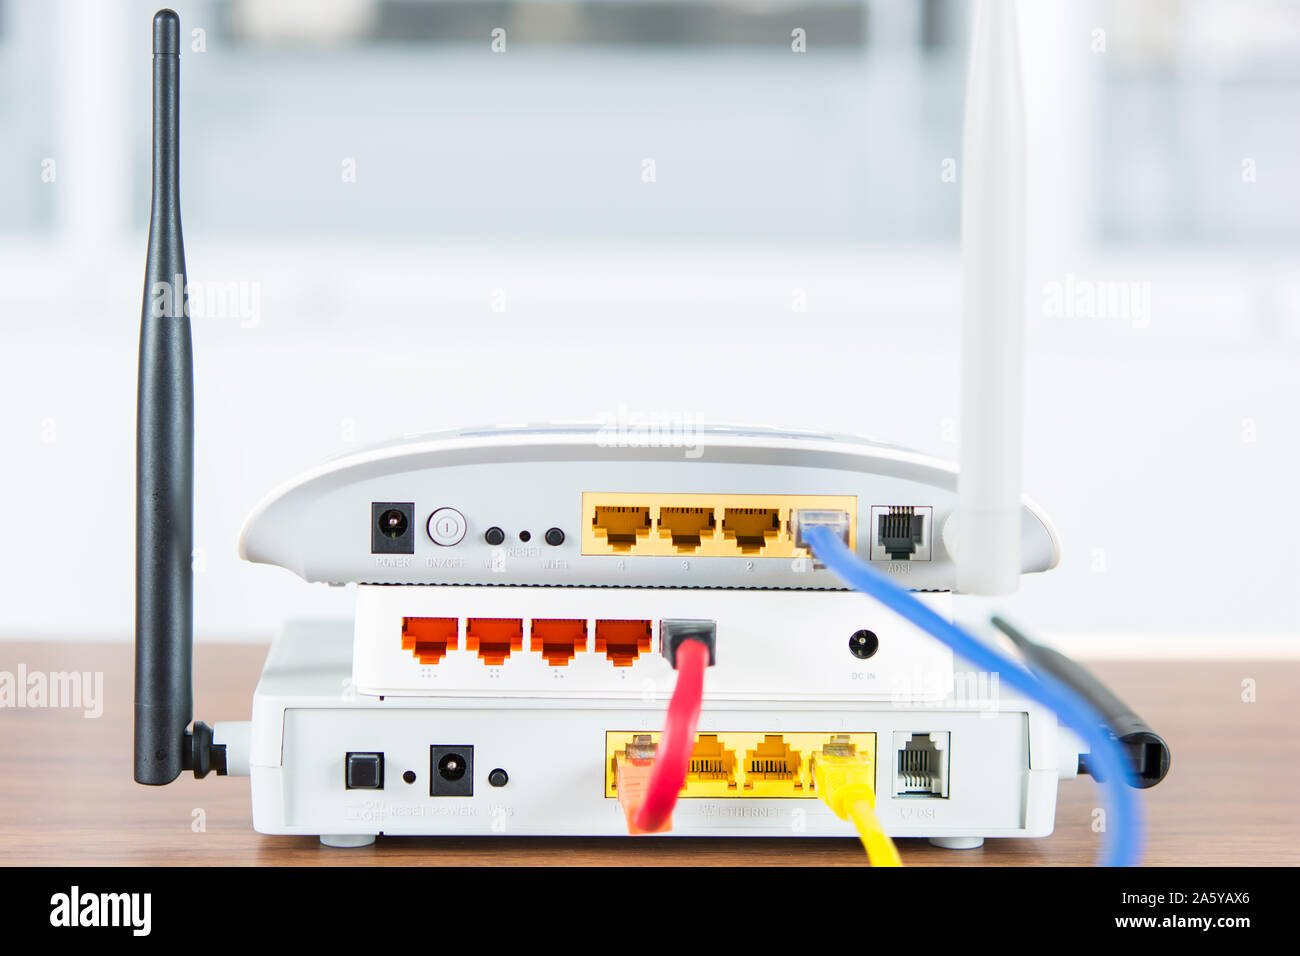 Wireless modem router network hub with cable connect on wooden table in the  room Stock Photo - Alamy